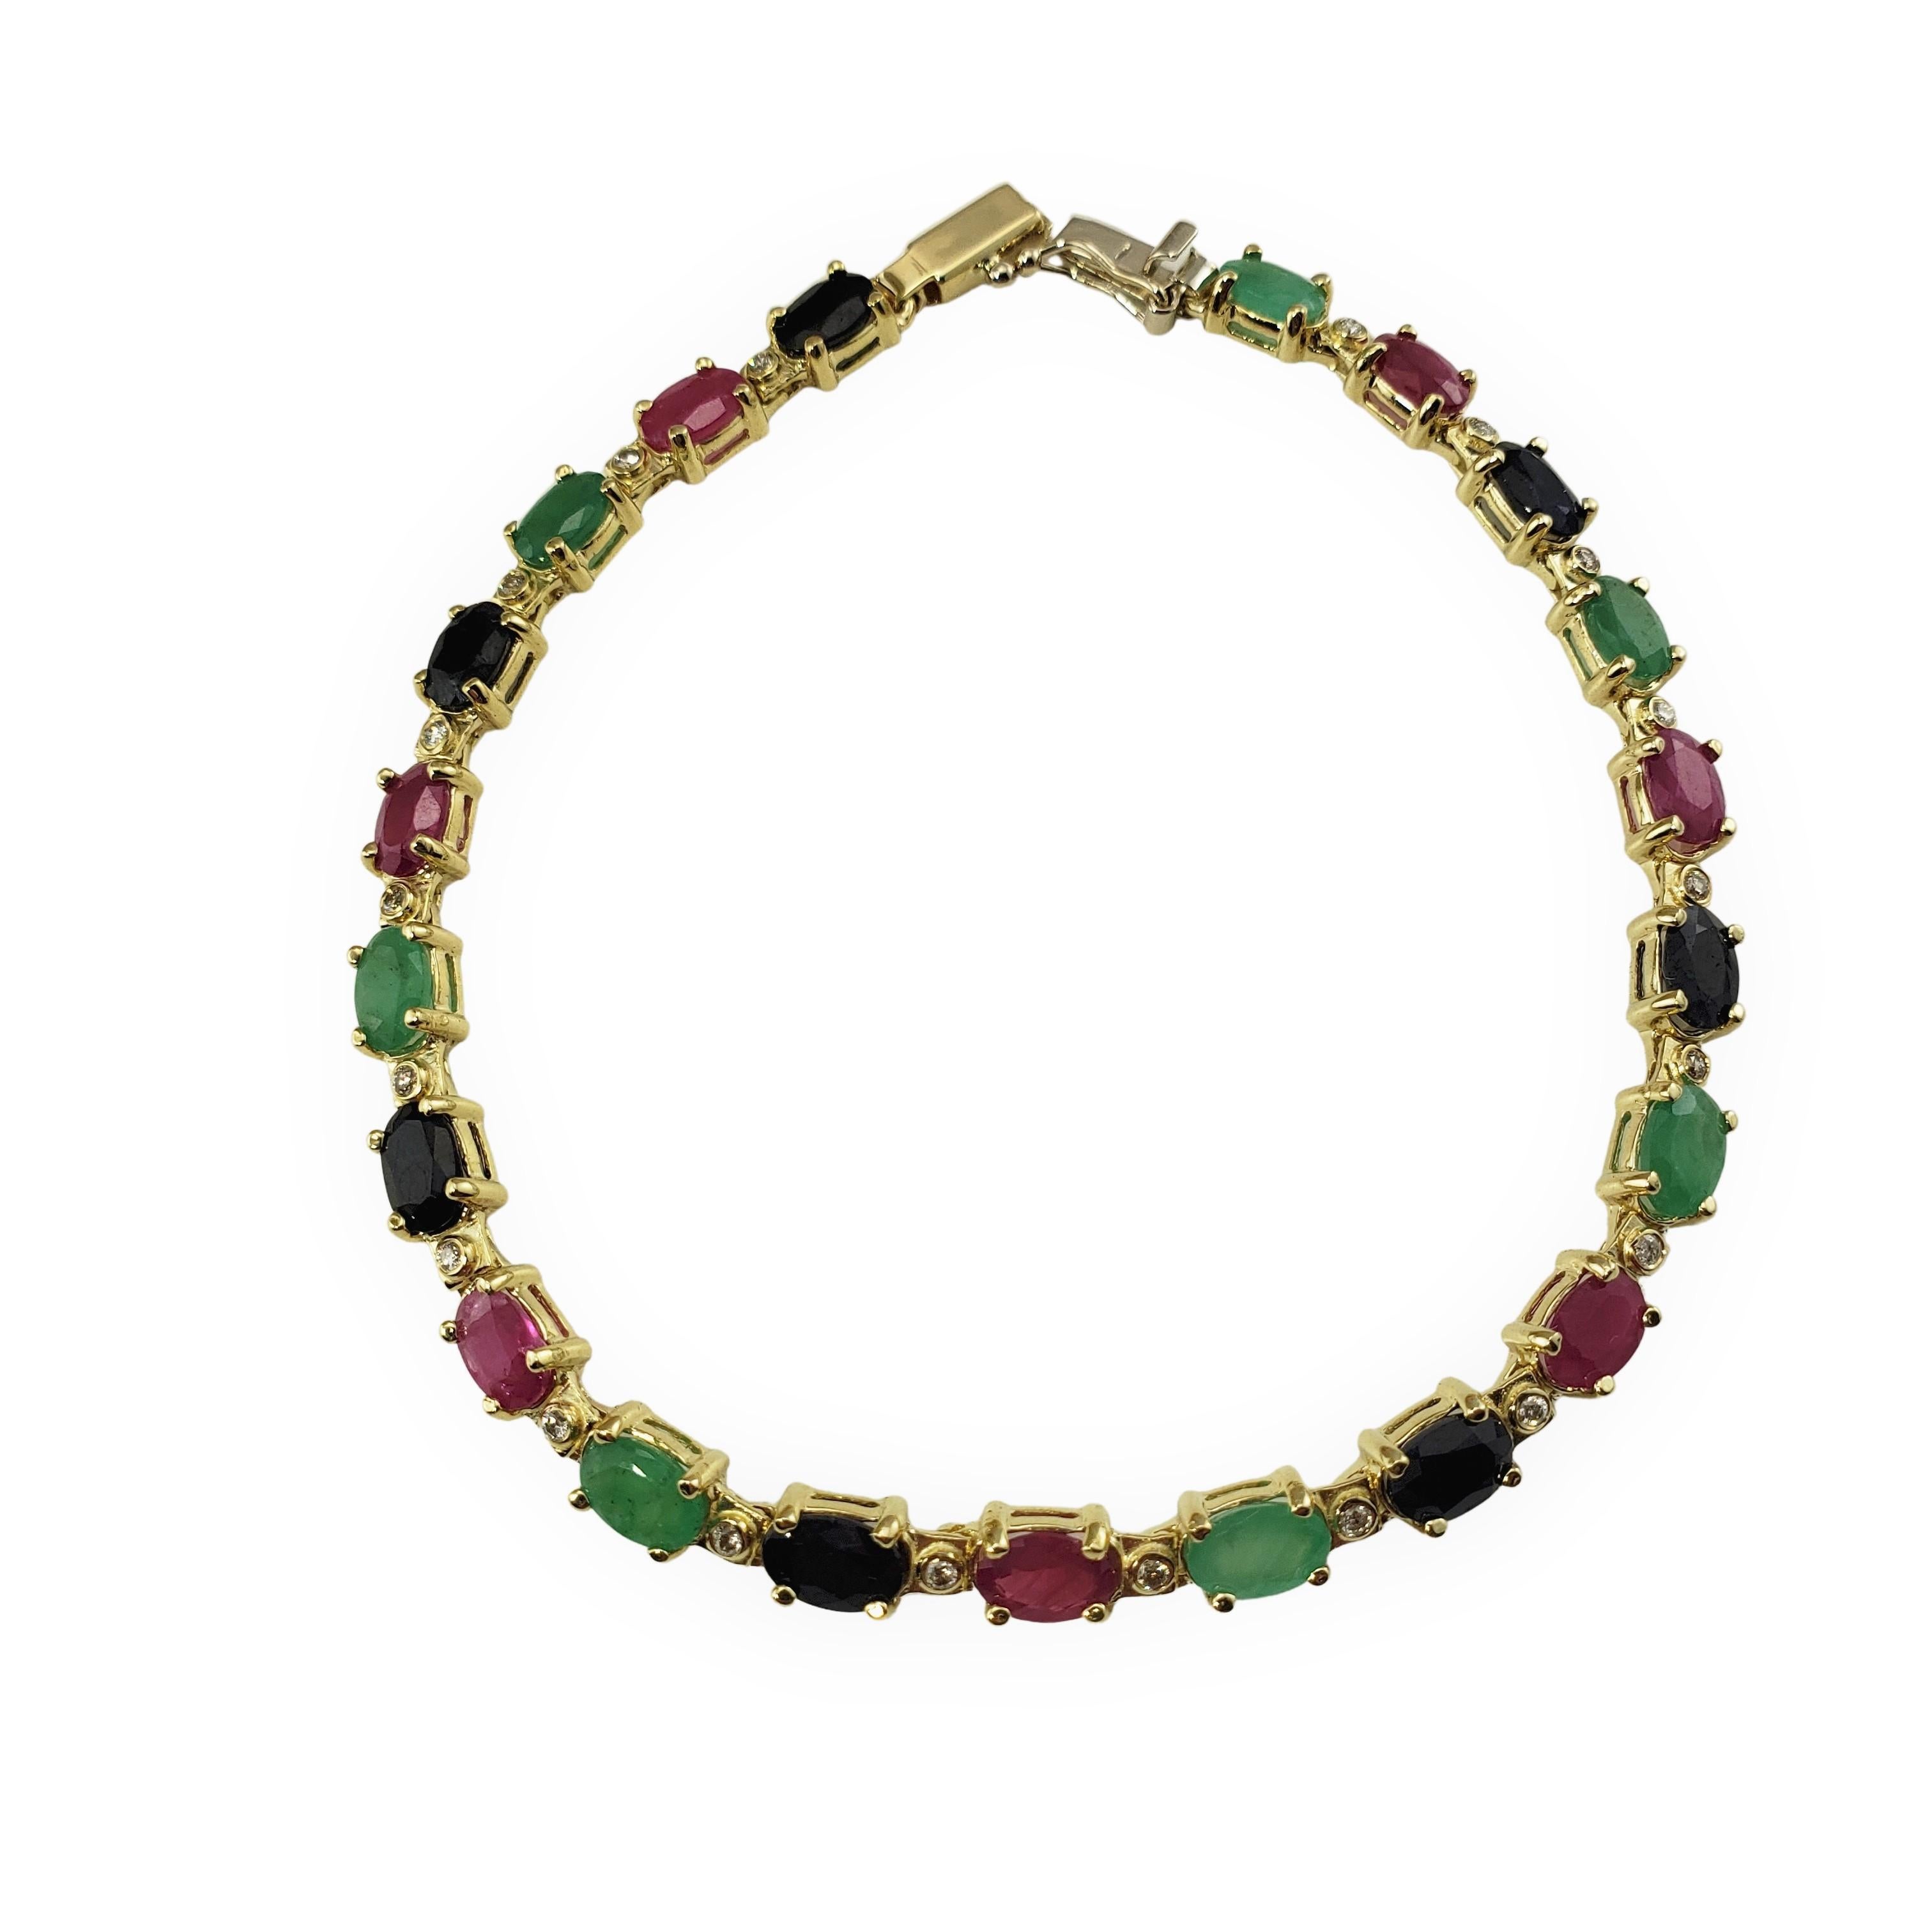 14 Karat Yellow Gold Diamond, Emerald, Sapphire and Ruby Bracelet-

This lovely bracelet features 20 round brilliant cut diamonds 21 oval ruby, sapphire and emerald gemstones (6 mm x 4 mm each) set in classic 14K yellow gold.   Width: 5